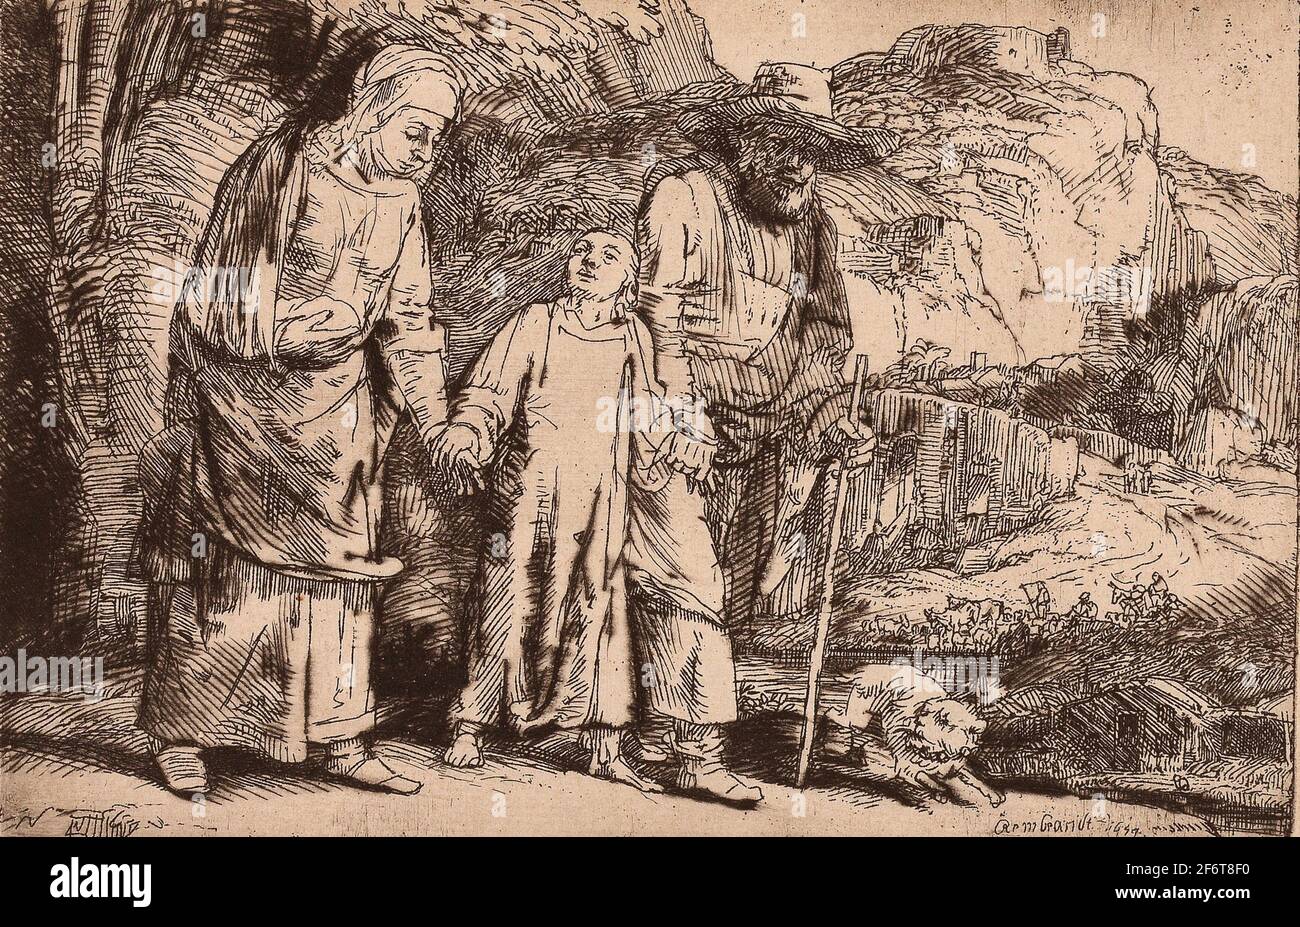 Author: Rembrandt Harmenszoon van Rijn. Christ Returning from the Temple with His Parents - 1654 - Rembrandt van Rijn Dutch, 1606-1669. Etching and Stock Photo